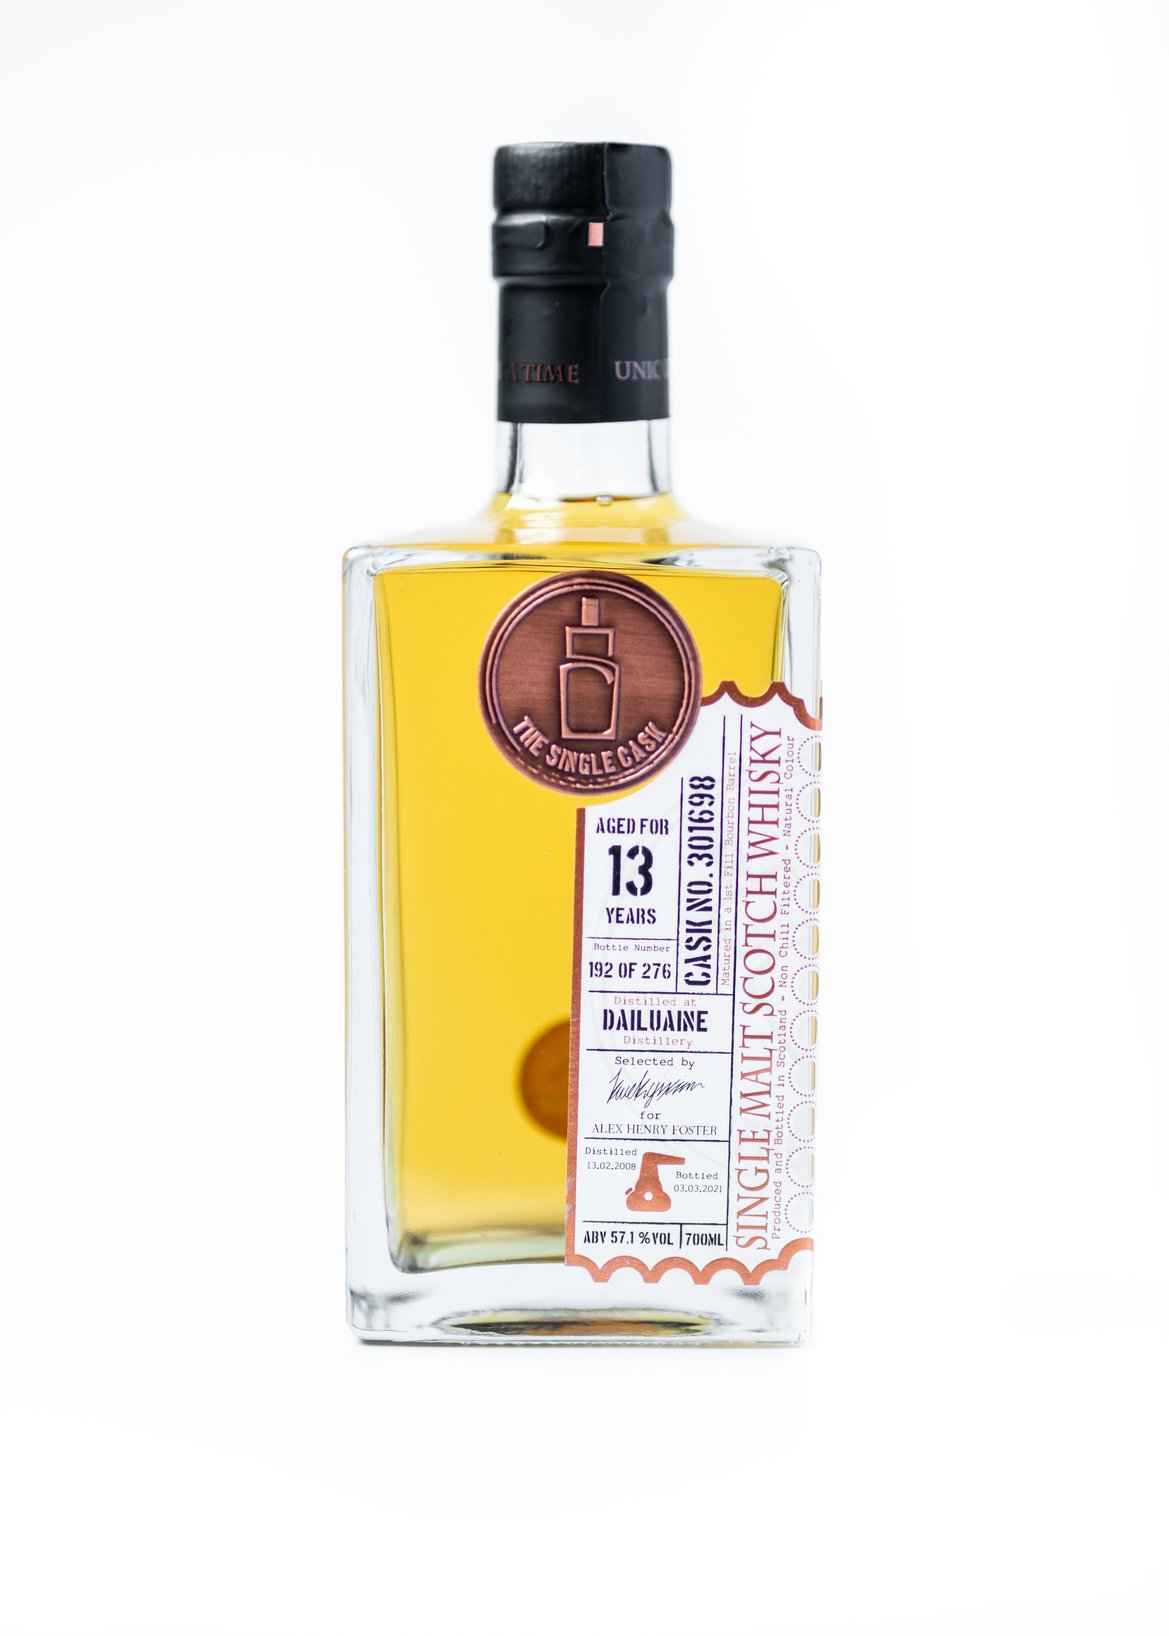 Dailuaine 13 years old whisky Alex Henry Foster edition (cask 301698)